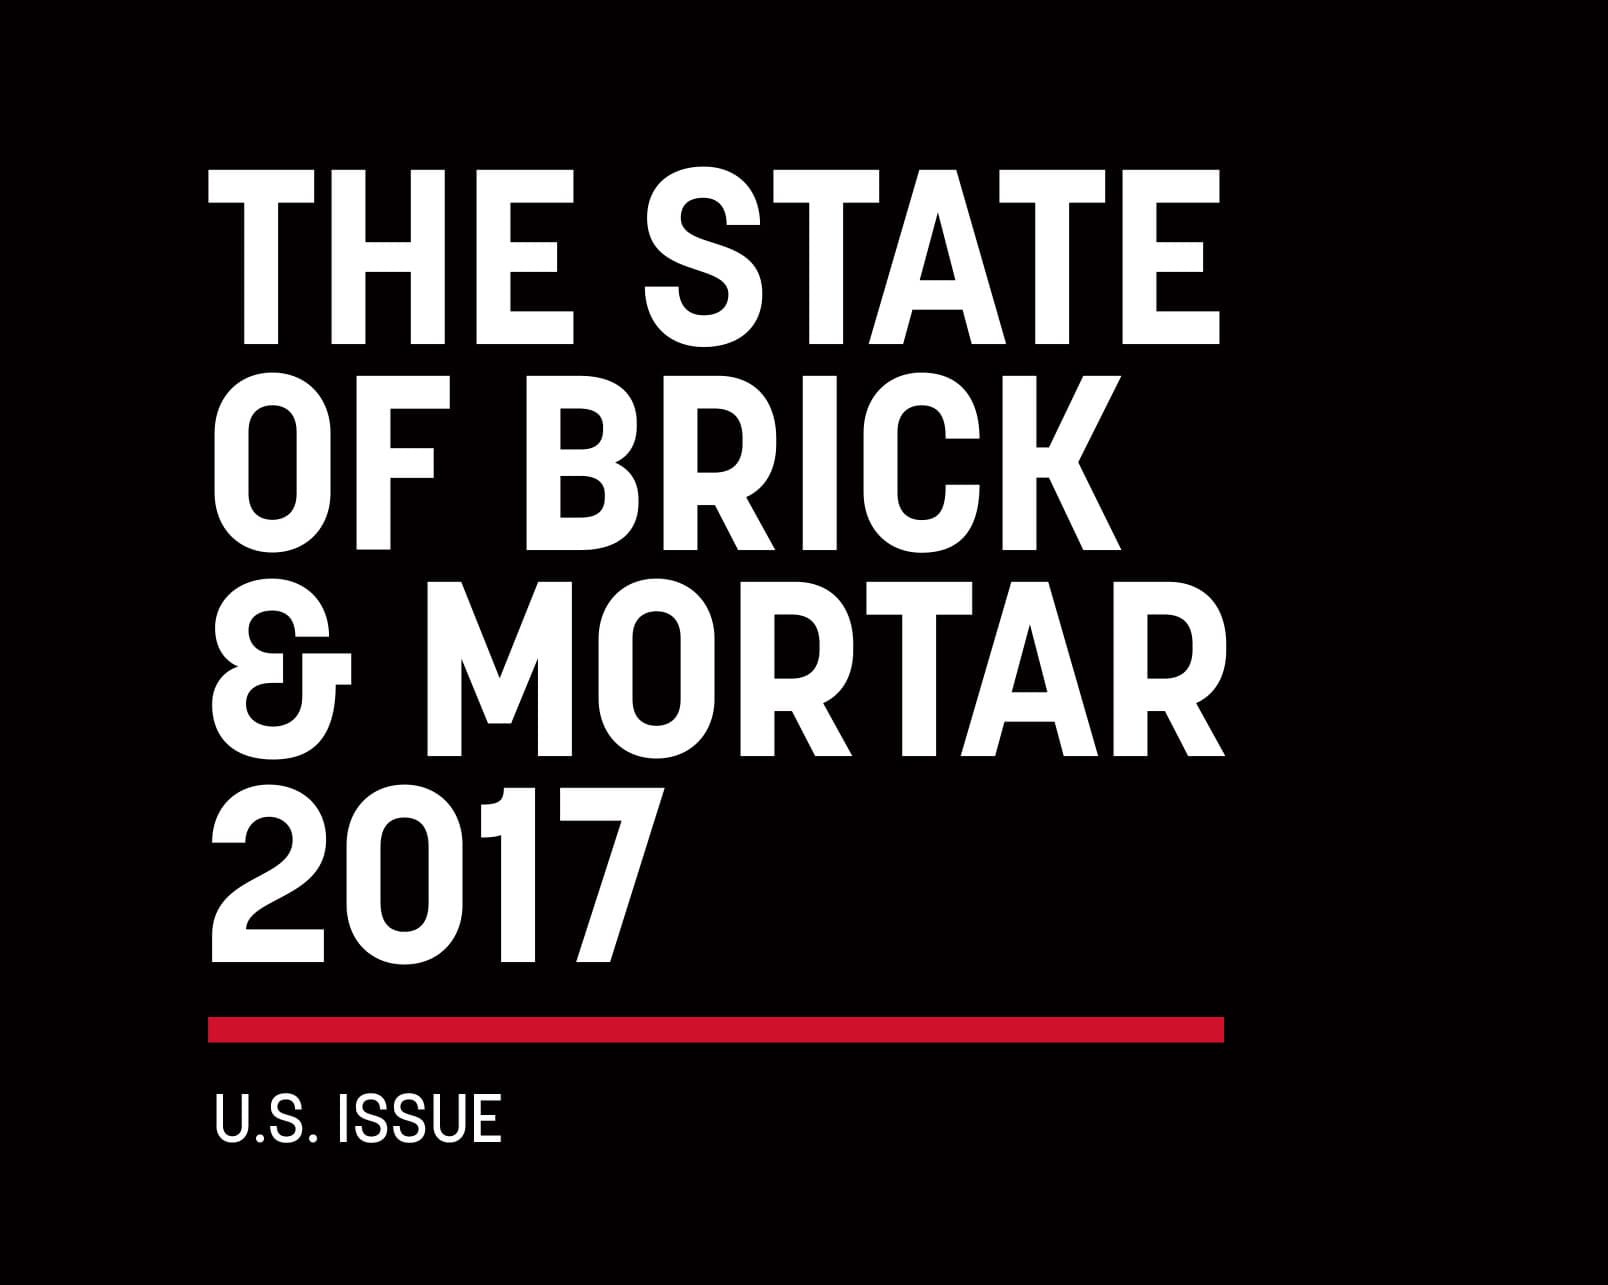 The State of Brick & Mortar 2017